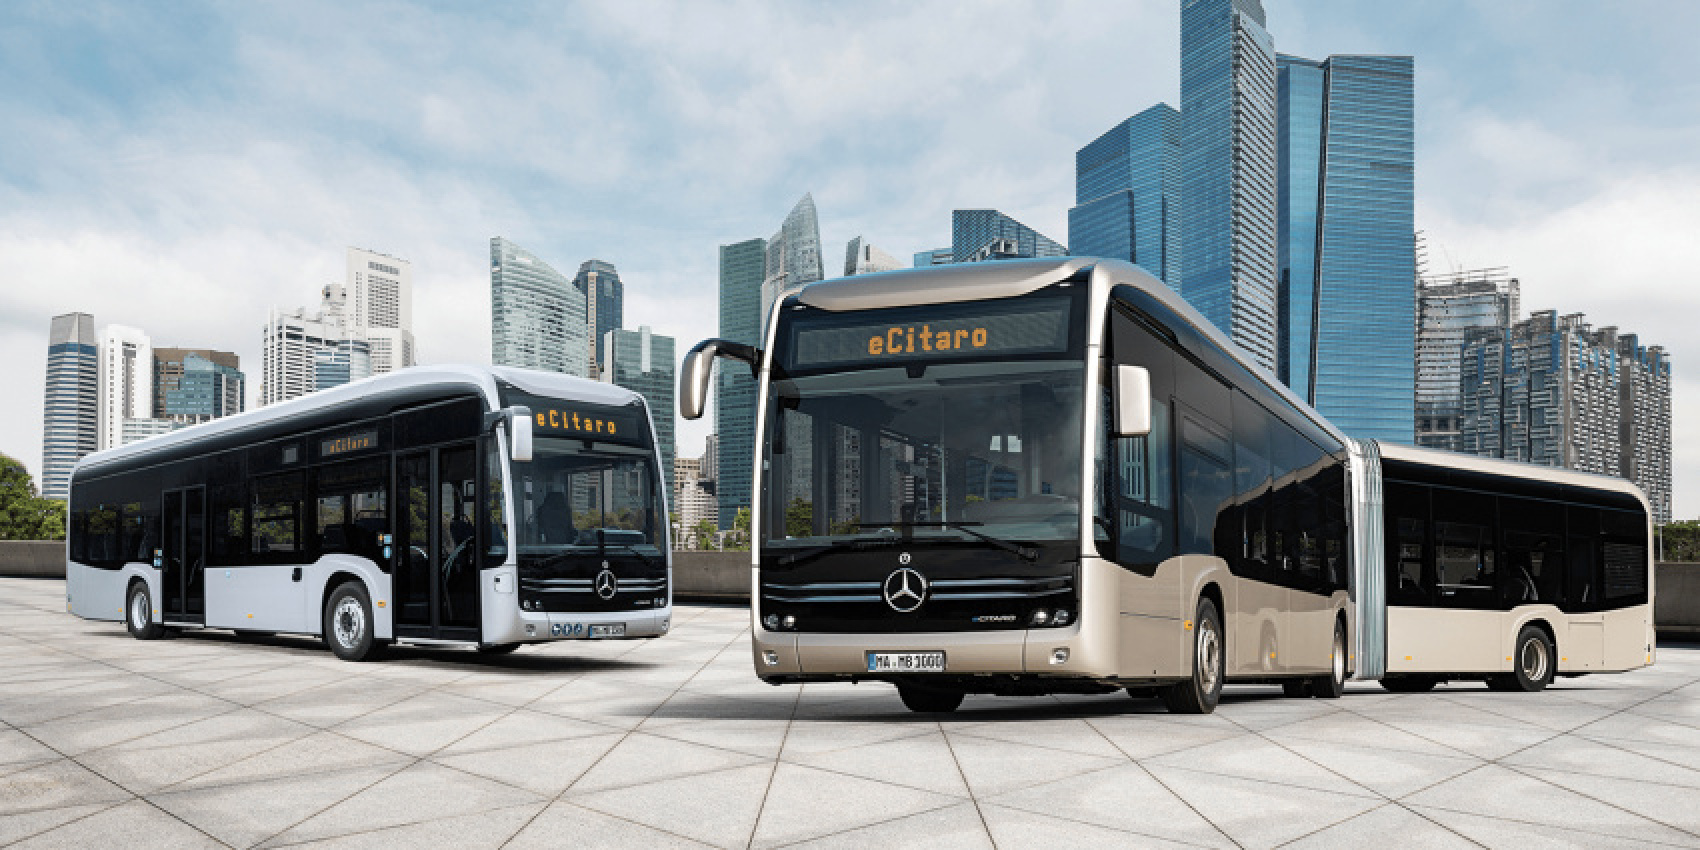 autos, cars, electric vehicle, utility vehicles, akasol, daimler buses, ecitaro, ecitaro g, electric buses, fcev, public transport, range extenders, suppliers, toyota, daimler buses wants to sell only electric city buses from 2030